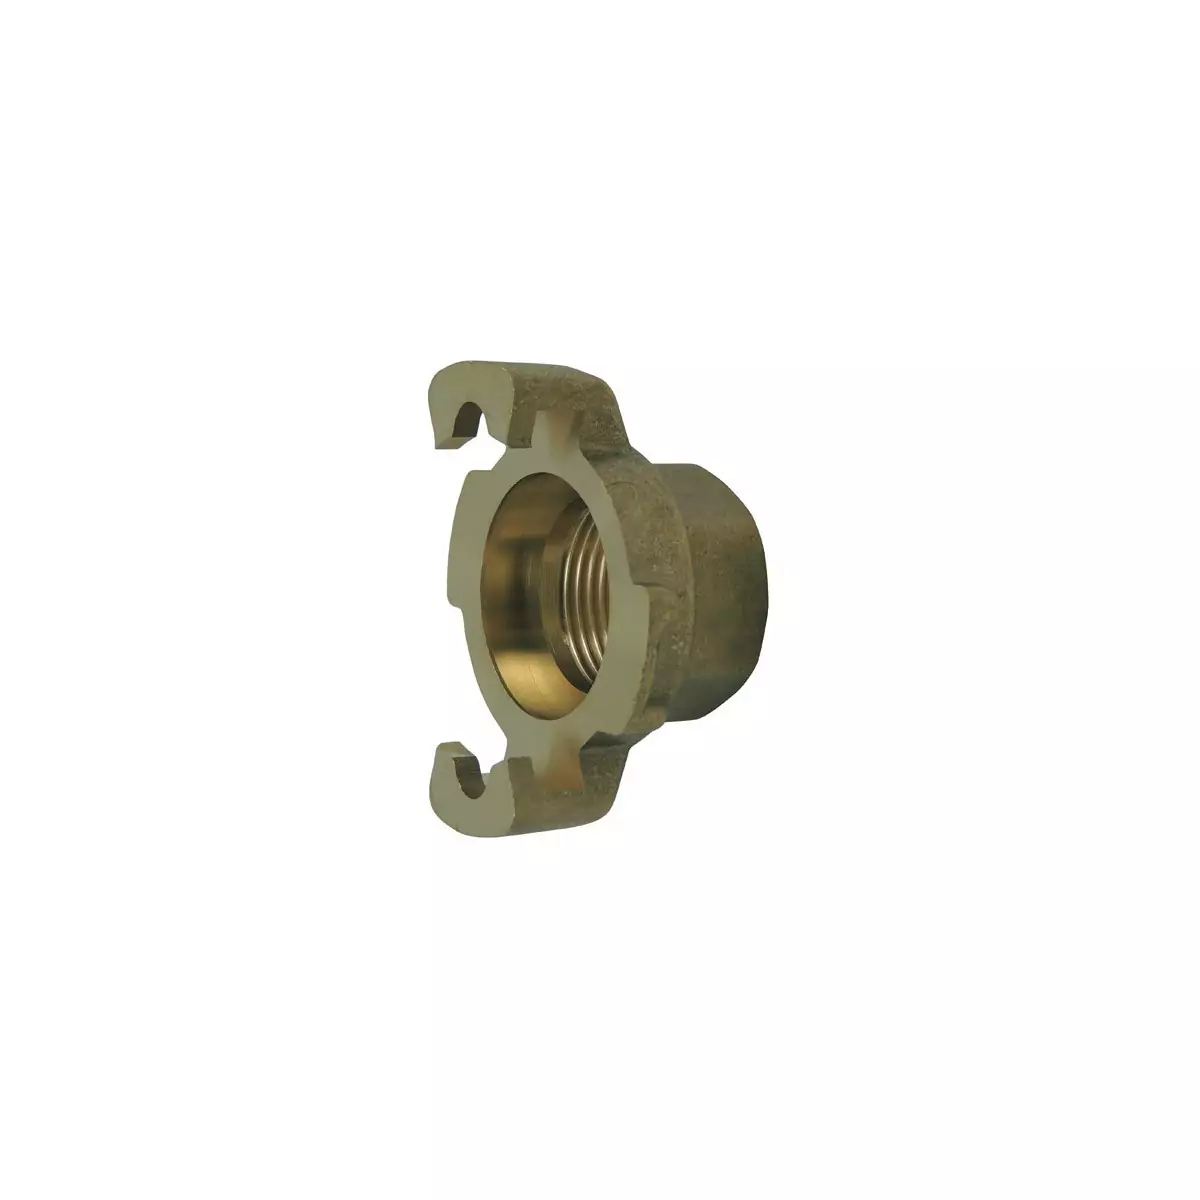 Express fitting with threaded end, without brass seal